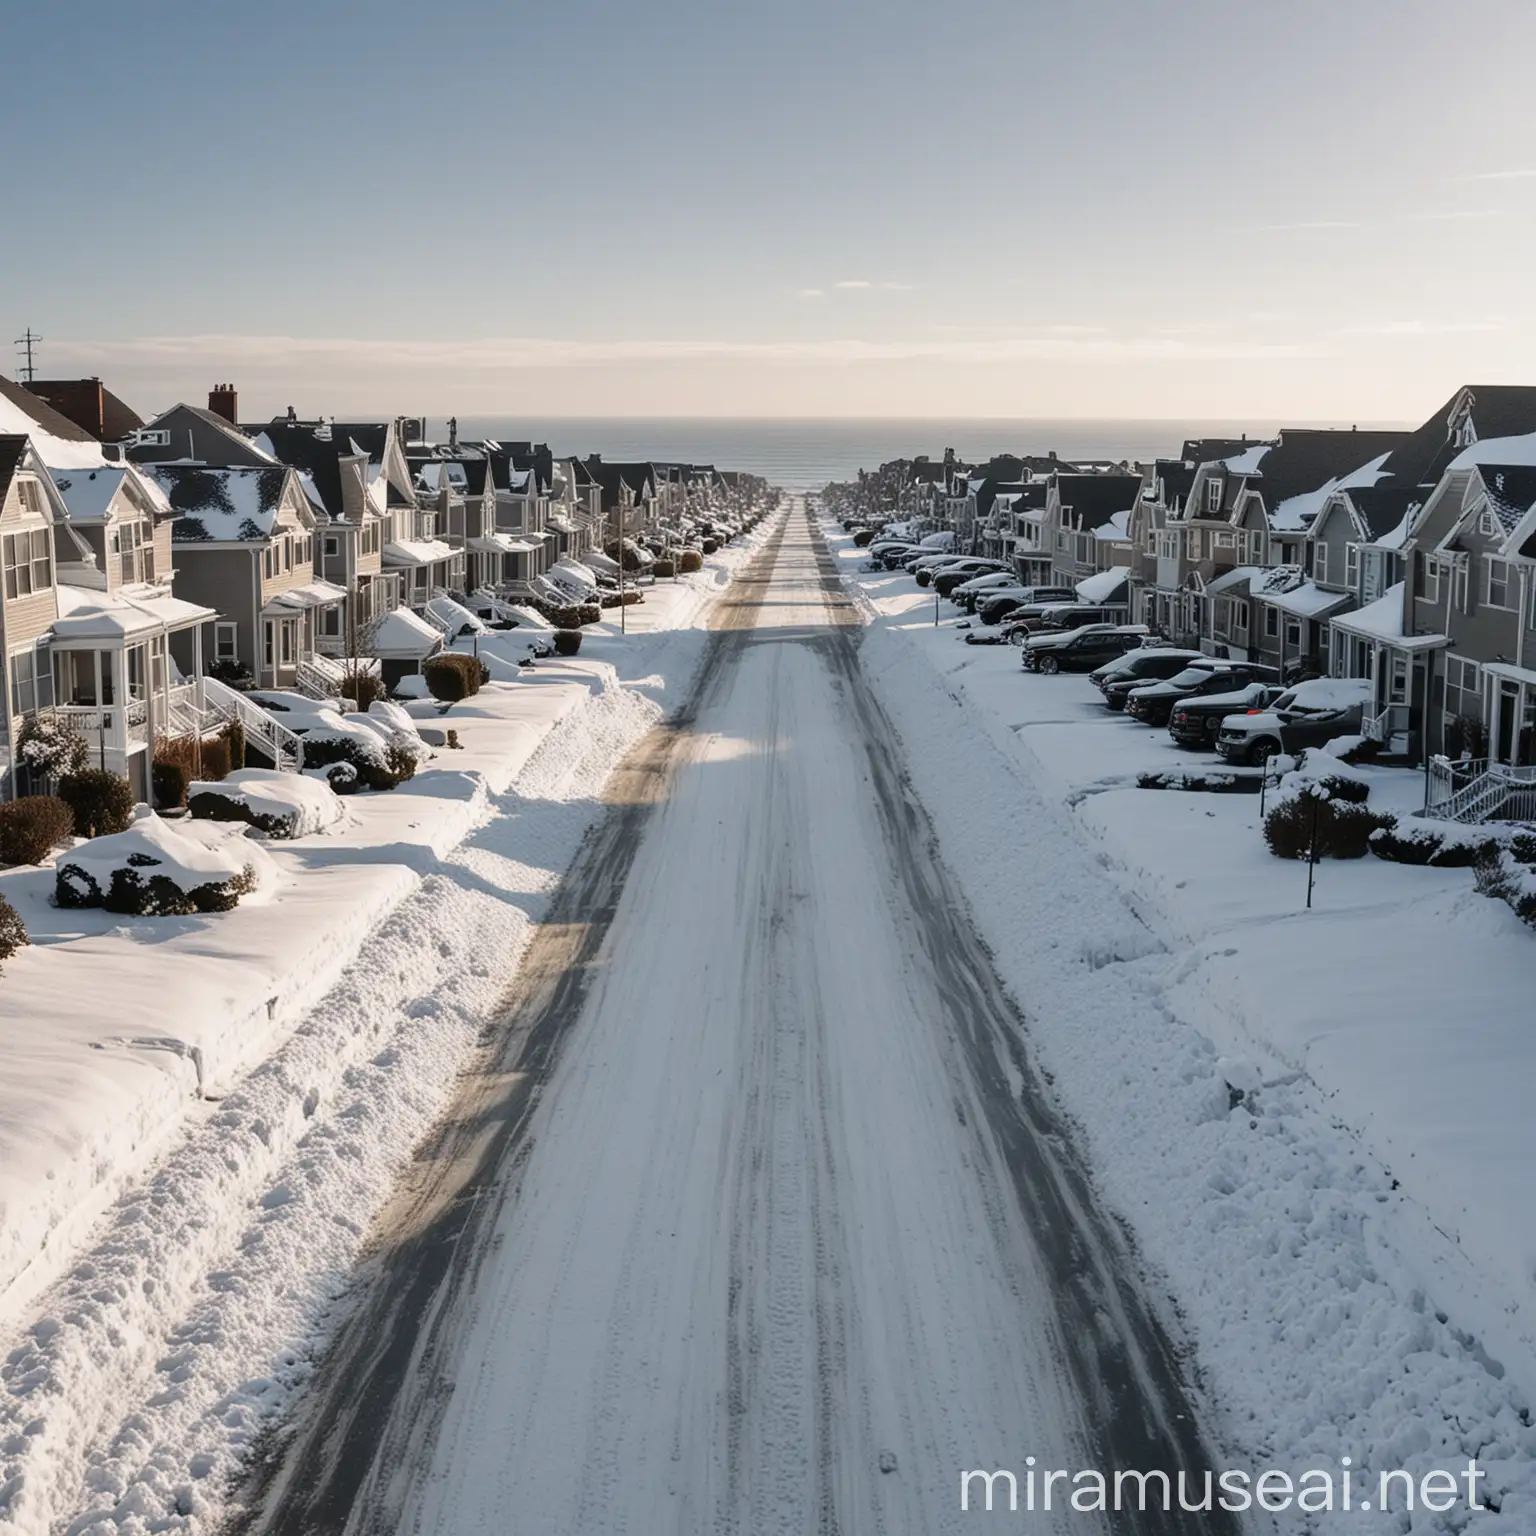 down an American suburban street with large houses and the street buried in snow with a giant ocean in the background